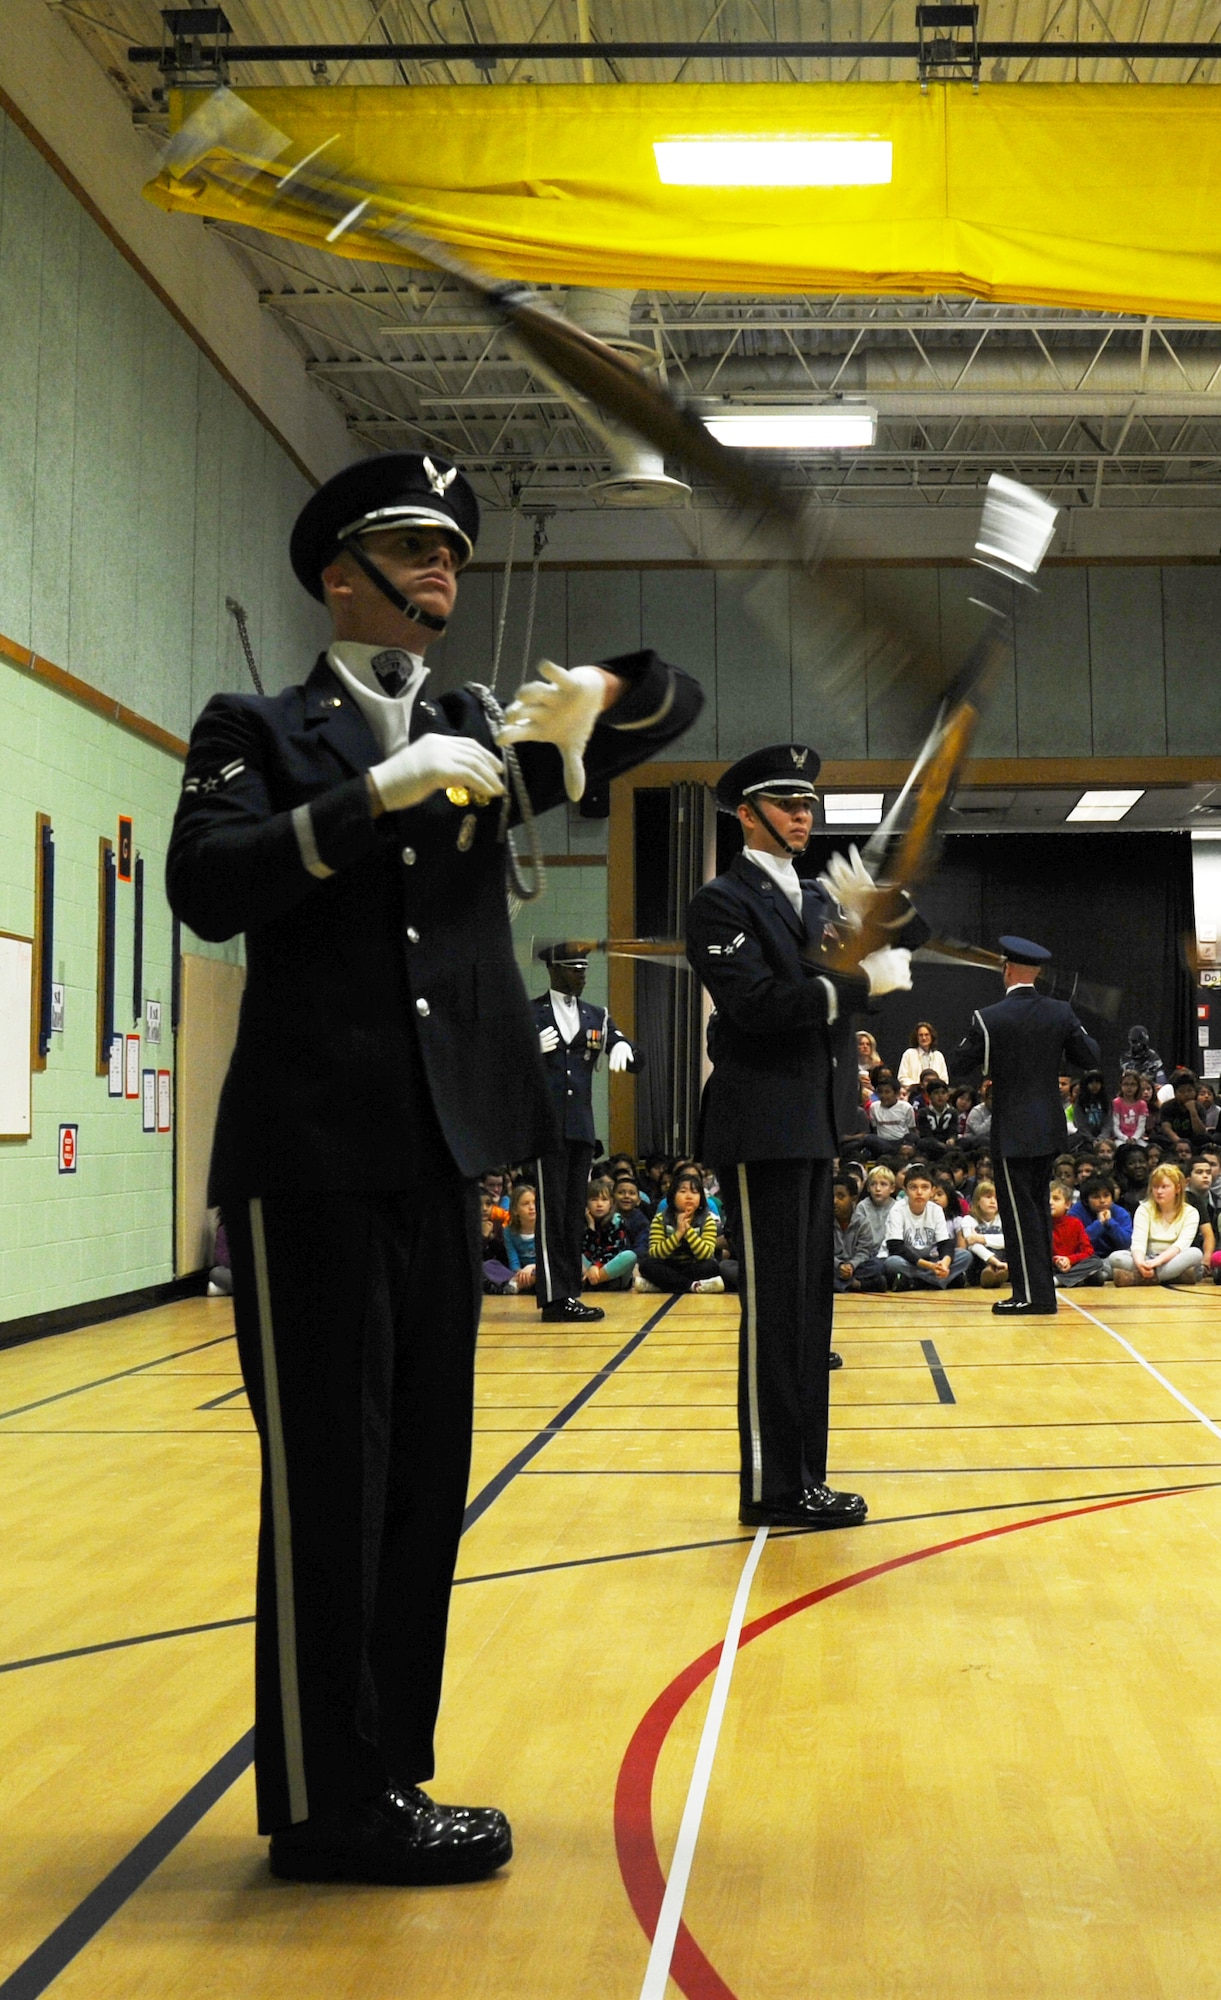 Members of the U.S. Air Force Honor Guard Drill Team toss their M-1 rifles during a performance at Belvedere Elementary School in Falls Church, Va., Nov. 26, 2012.   Inspiring patriotism and garnering interest in the U.S. Air Force are key aspects of the Drill Team mission.  (U.S. Air Force photo/Staff Sgt. Torey Griffith)